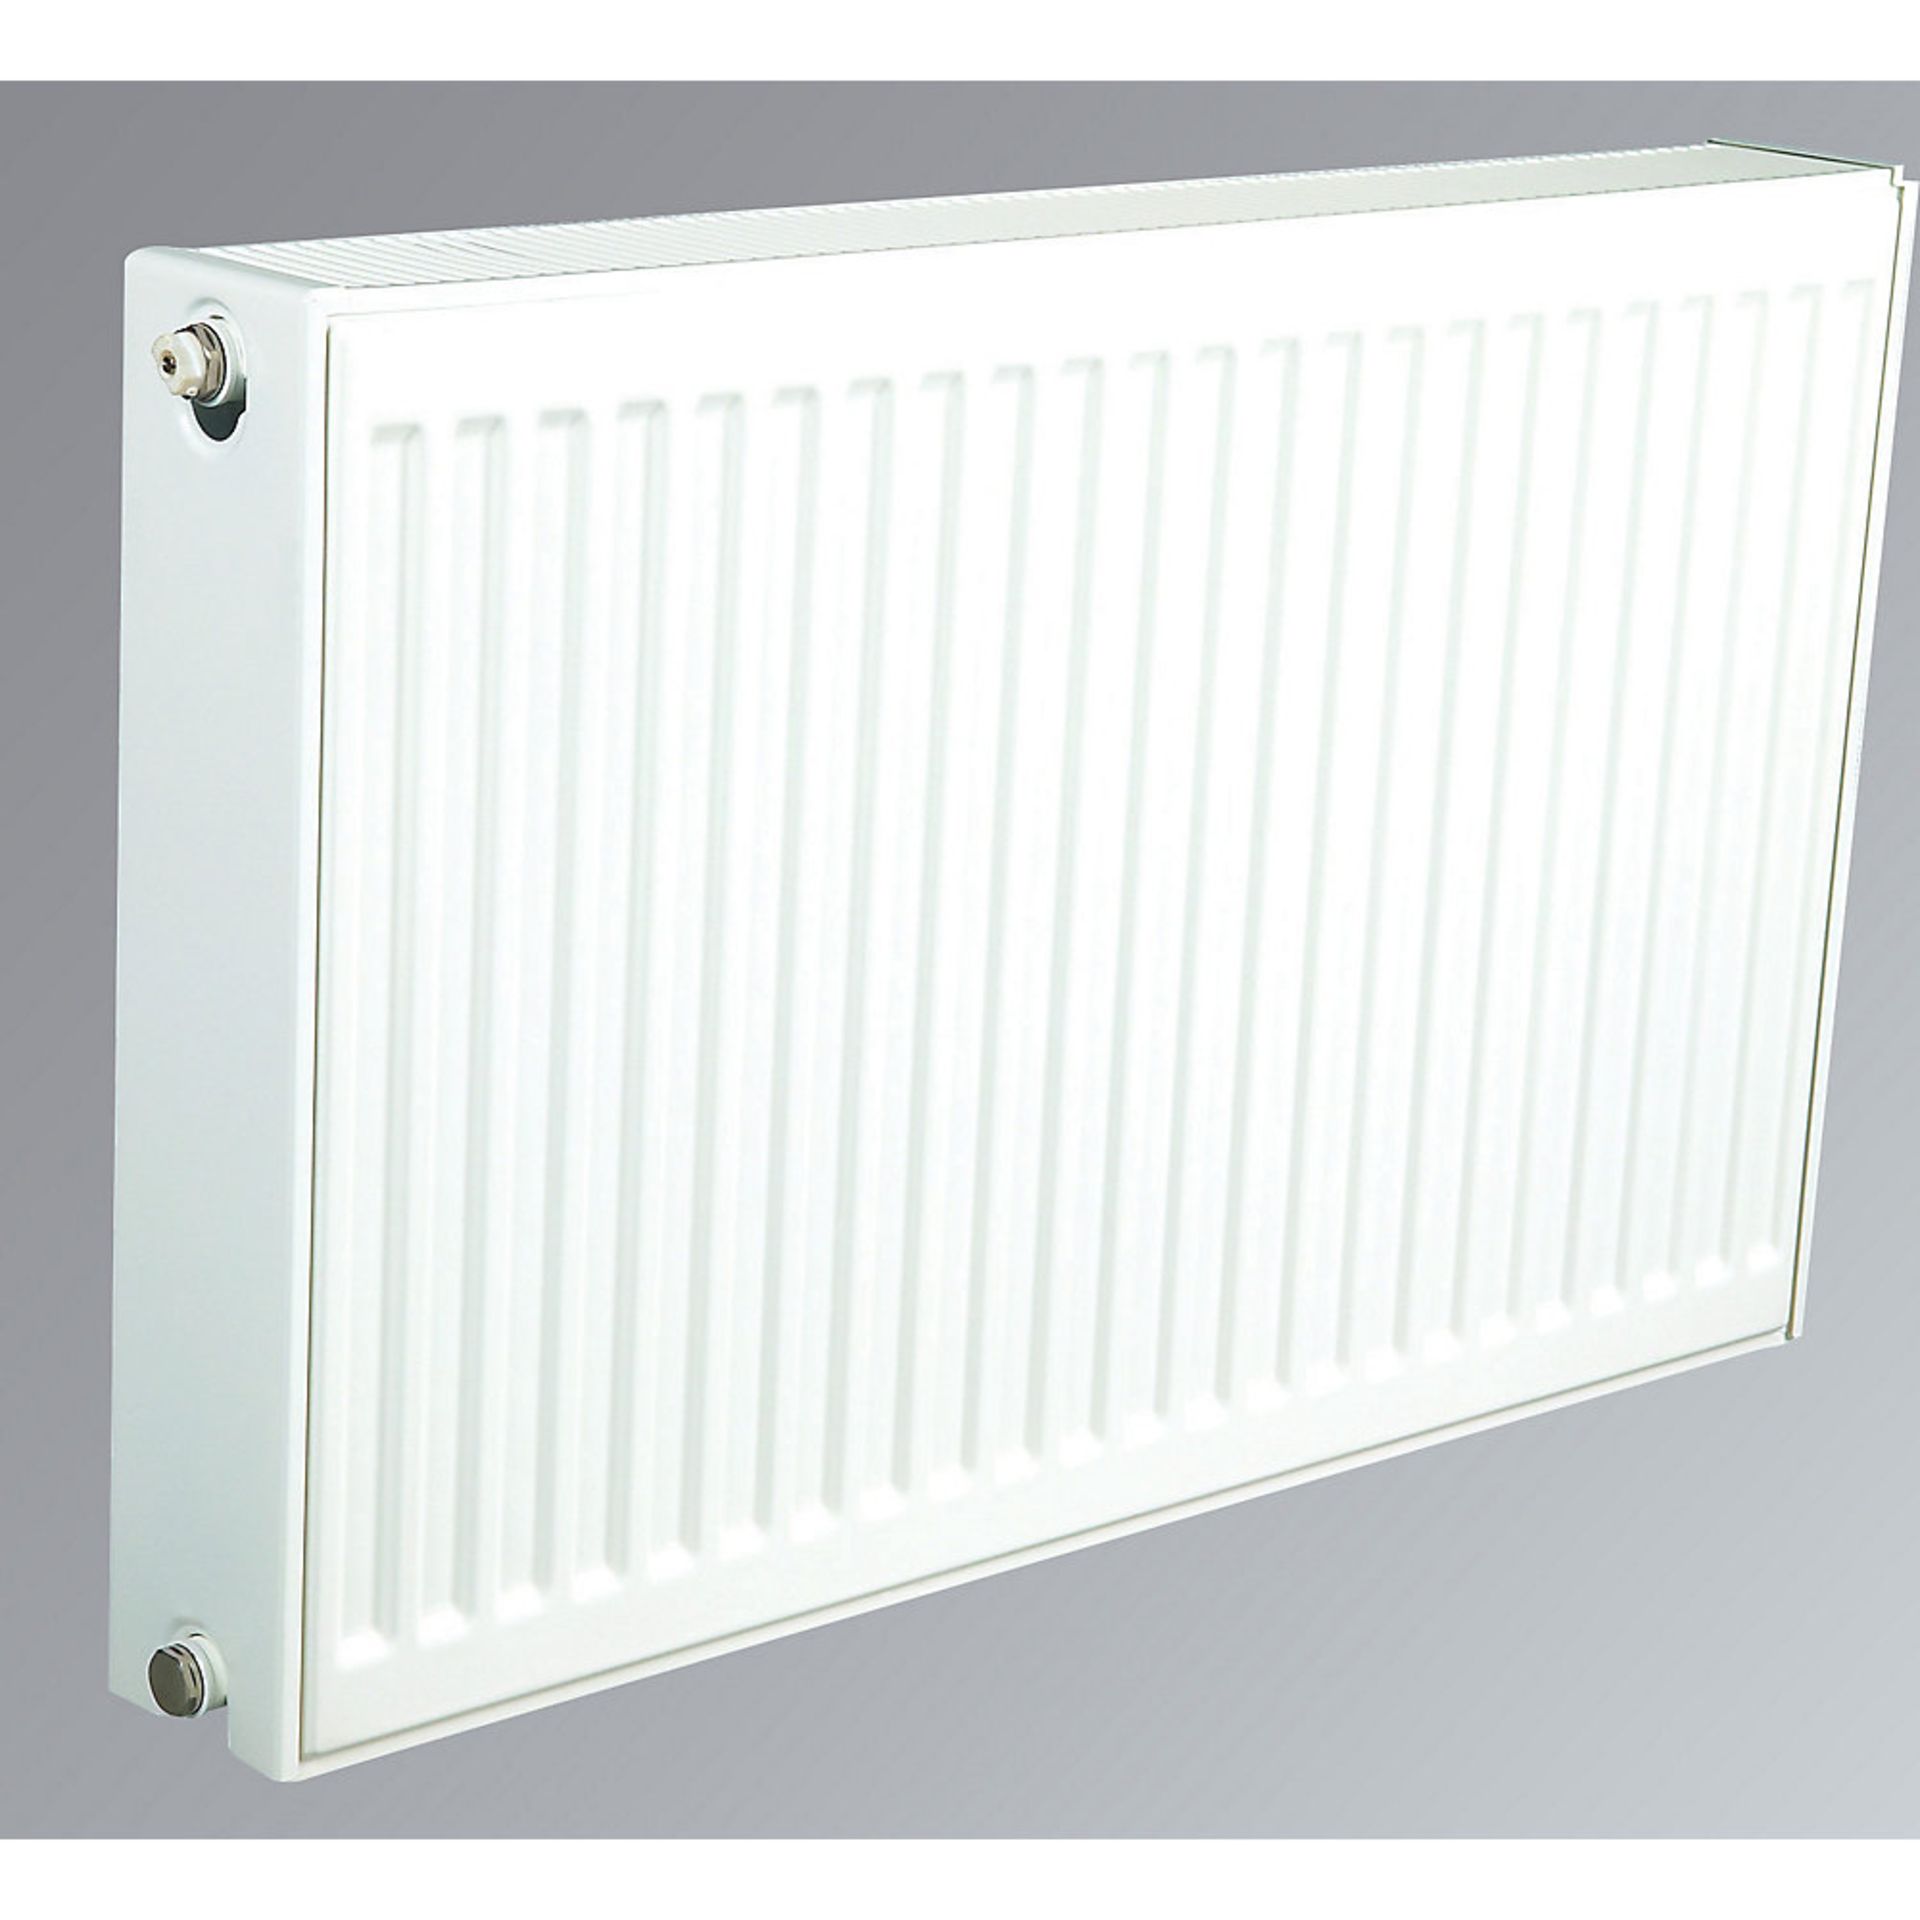 (PM1035) 500 X 1100MM KUDOX PREMIUM TYPE 22 DOUBLE-PANEL DOUBLE CONVECTOR RADIATOR WHITE. Hig... - Image 2 of 2